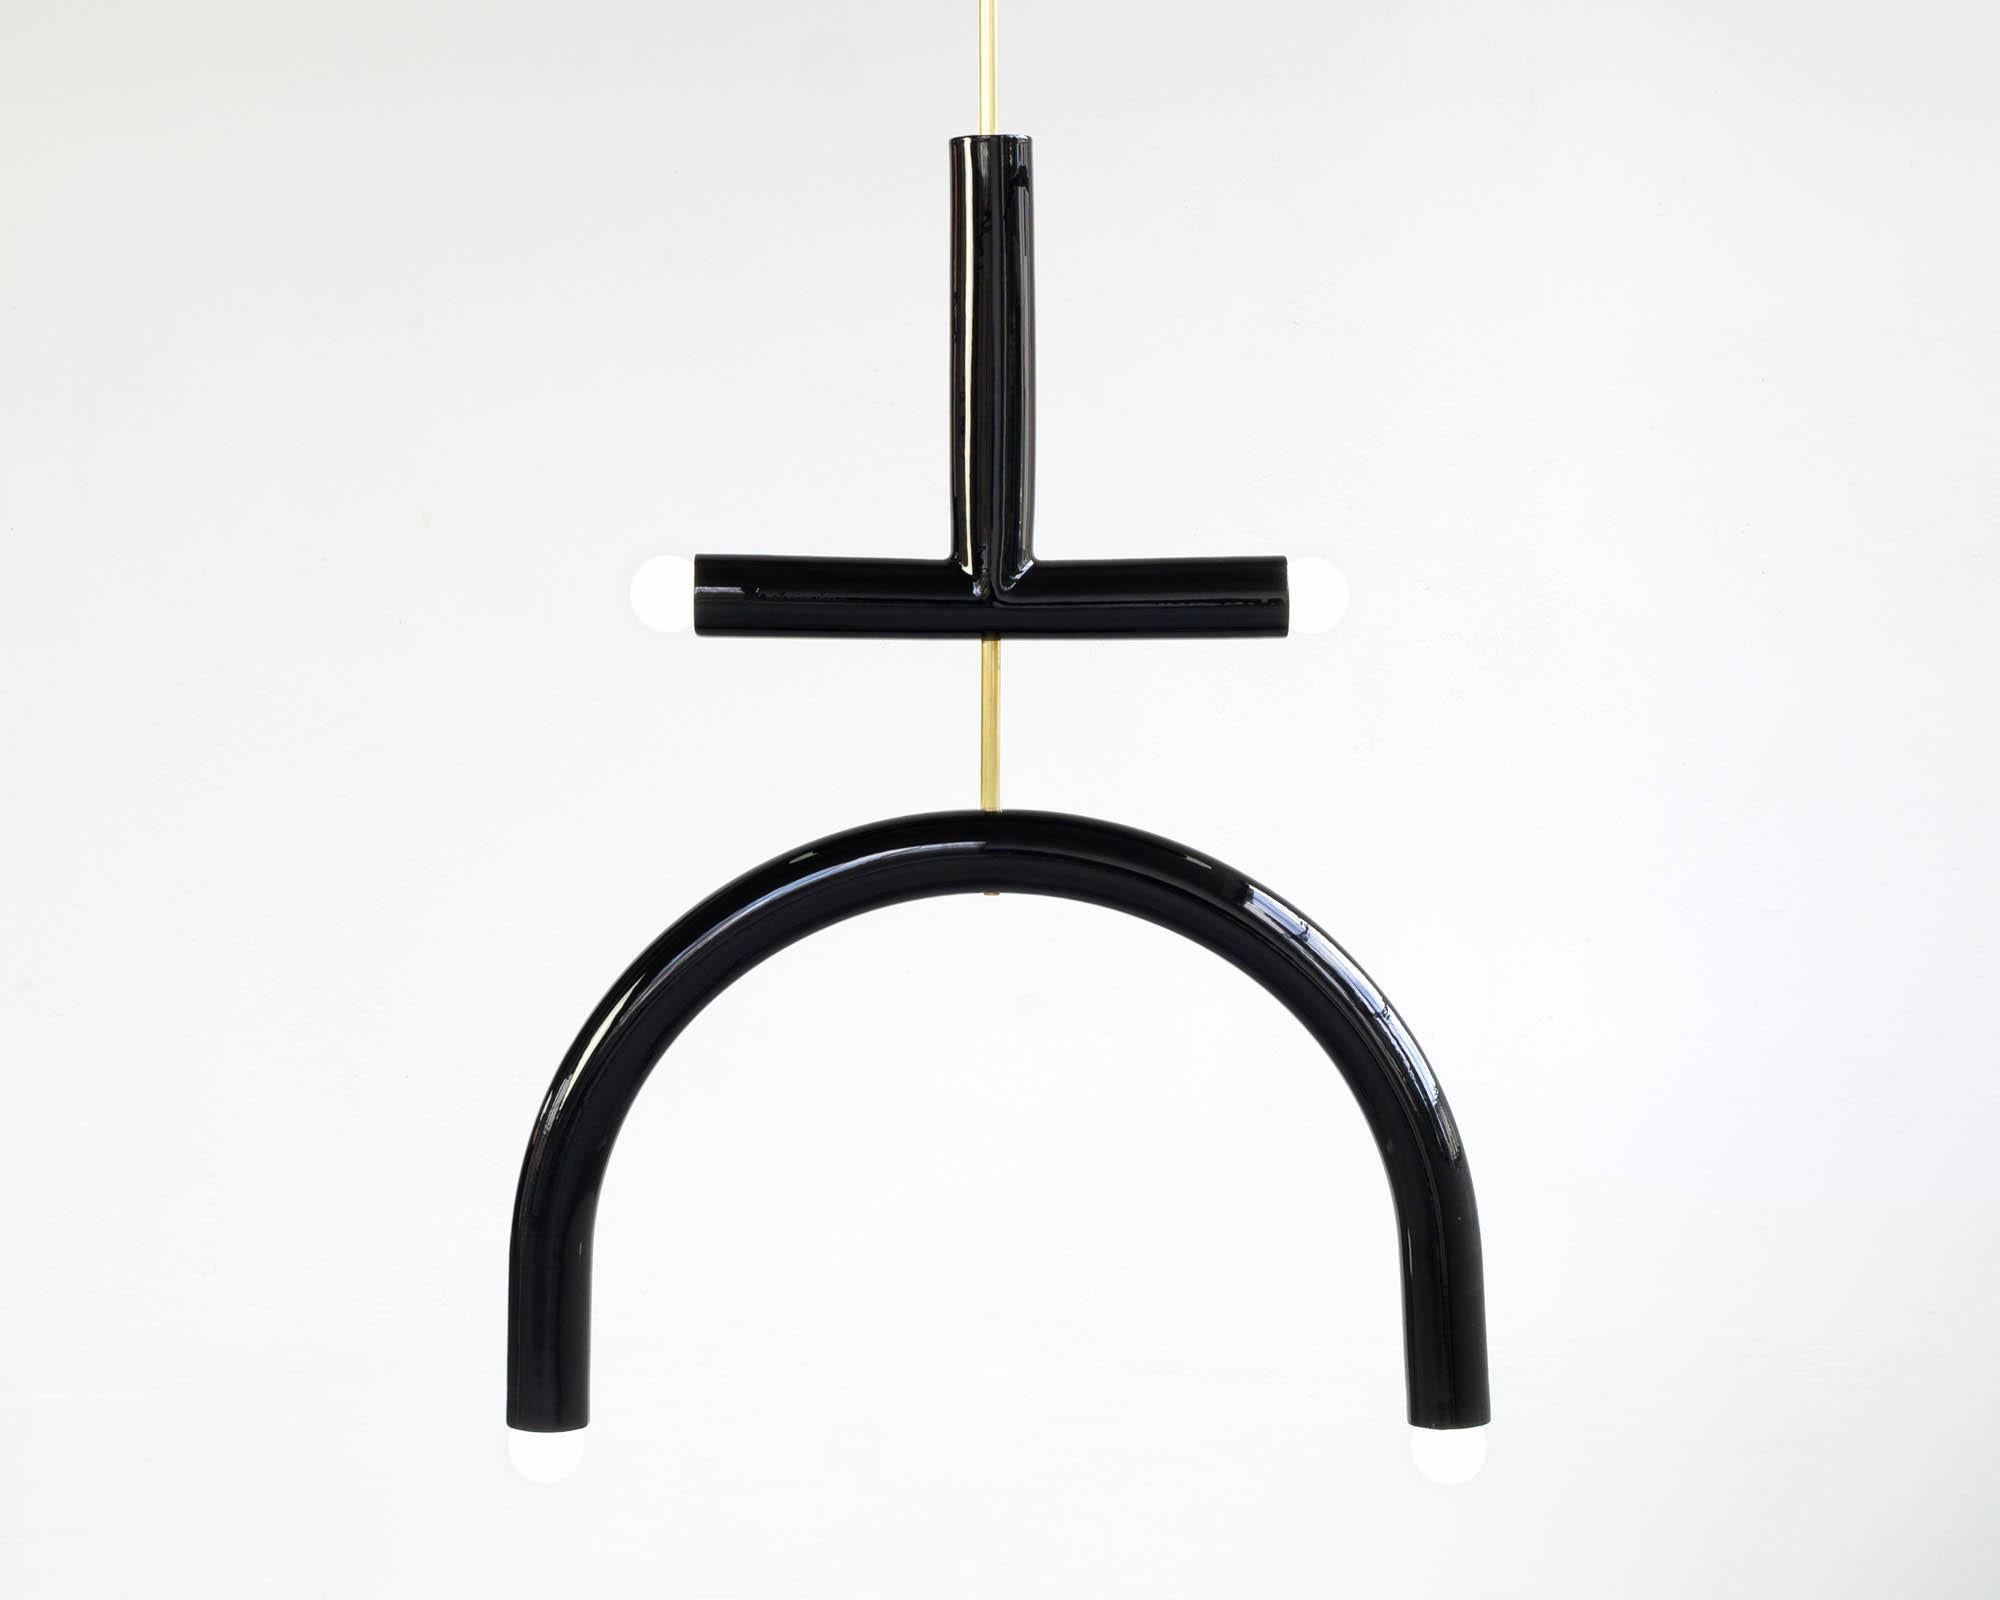 TRN E2 Pendant lamp / ceiling lamp / Chandelier 
Designer: Pani Jurek

Dimensions: H. 77.5 x 55 x 5 cm
Model show: Black 

Bulb (not included): E27/E26, compatible with US electric system

Materials: Hand glazed ceramic and brass
Rod: brass, length